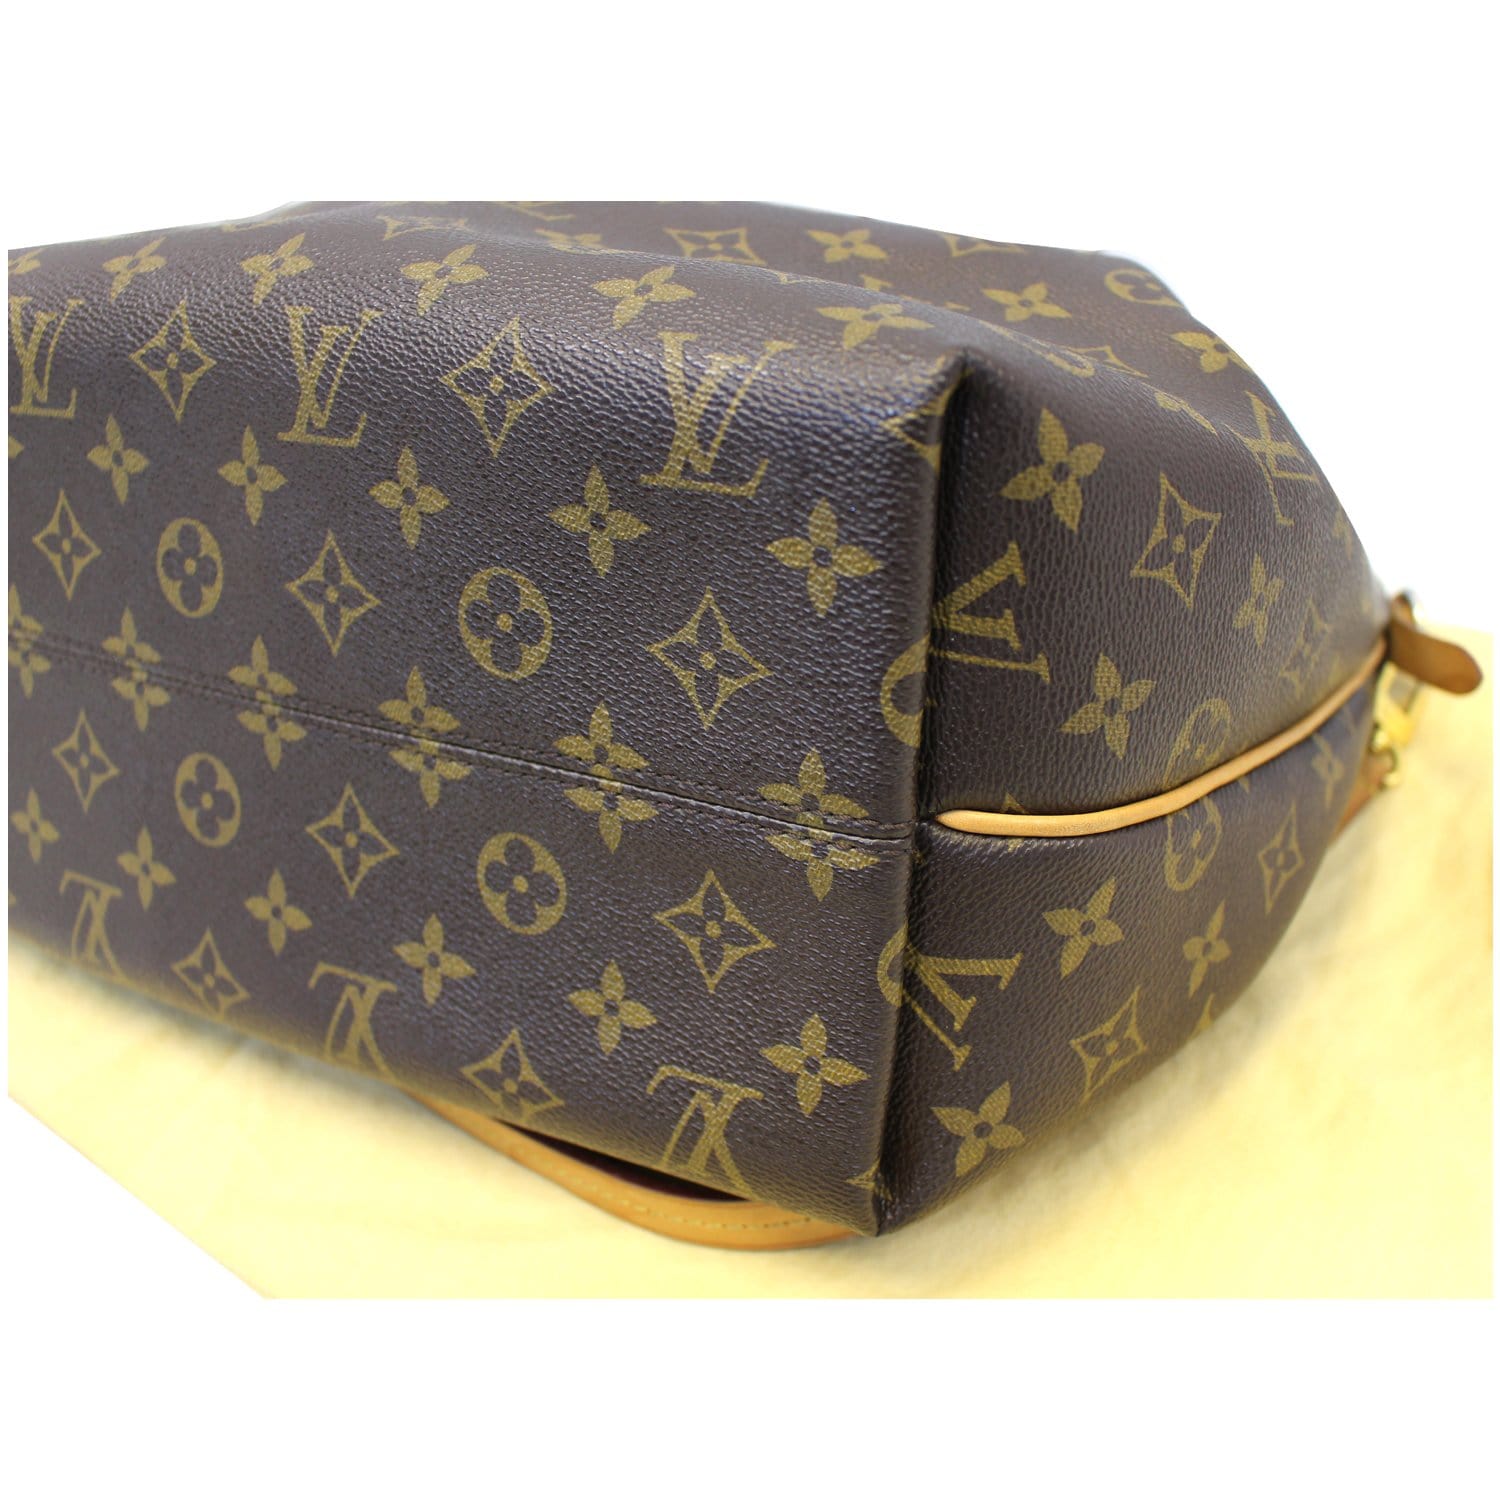 Best Authentic Louis Vuitton Turenne Gm In Great Condition for sale in  Hemet, California for 2023